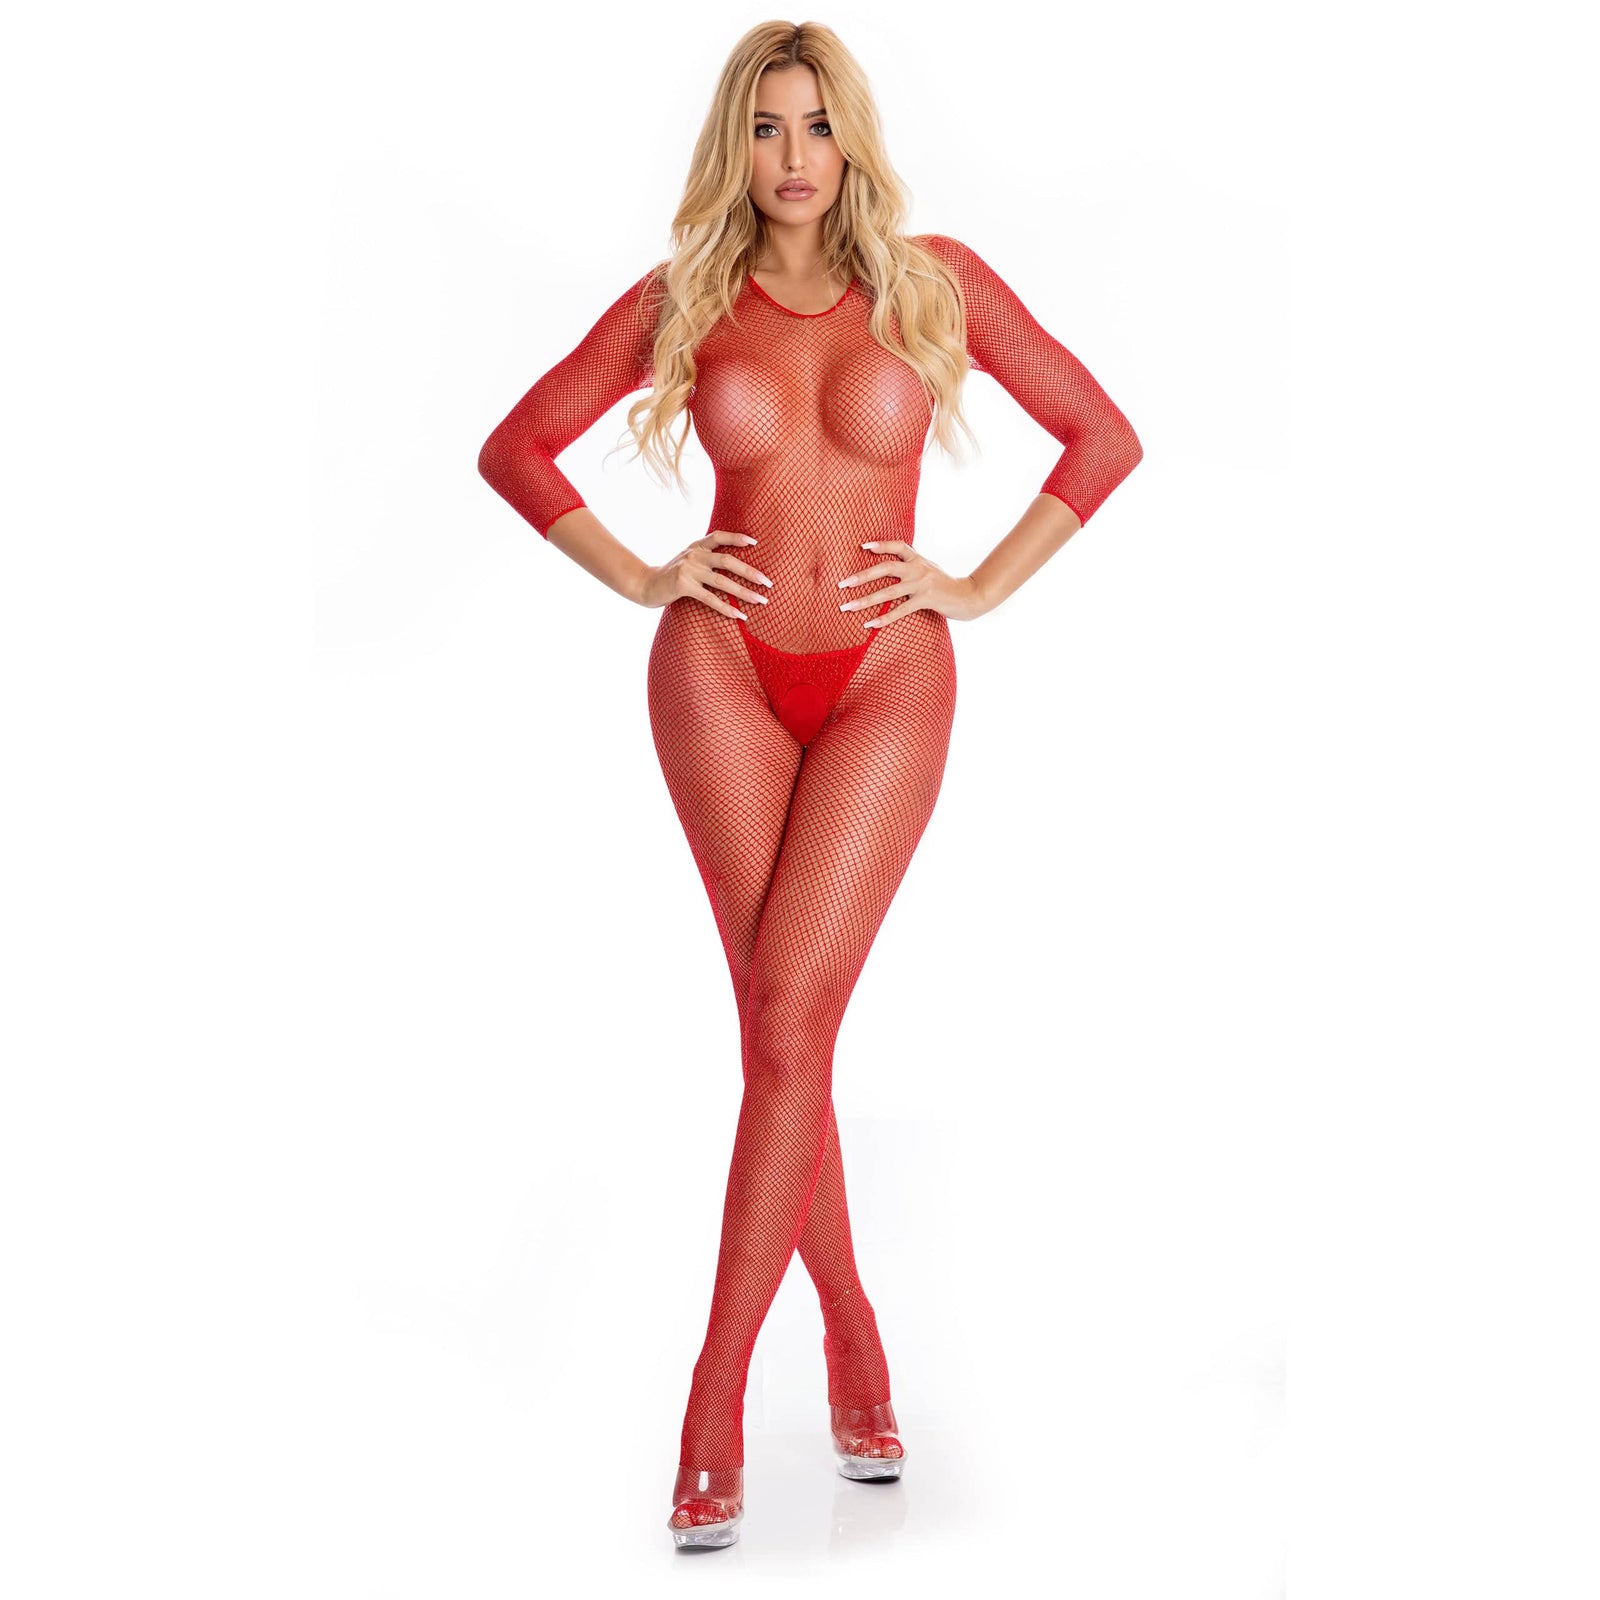 Pink Lipstick - Risque Crotchless Bodystocking Costume S/M (Red) Bodystockings 017036488870 CherryAffairs